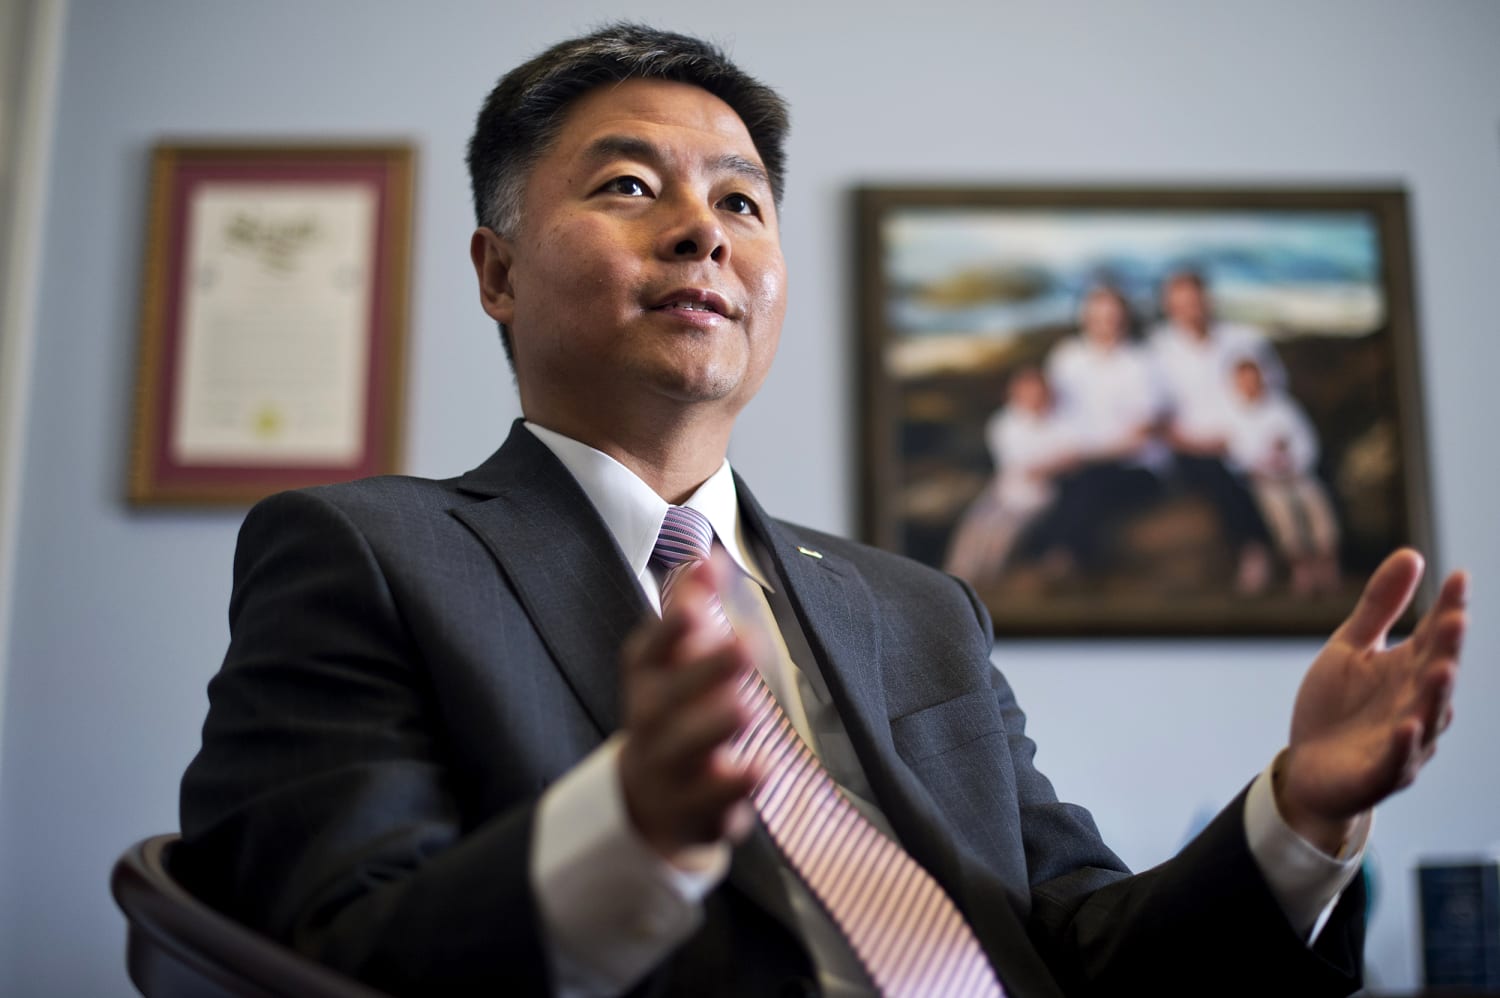 Rep. Ted Lieu responds to being called an 'agent of China'